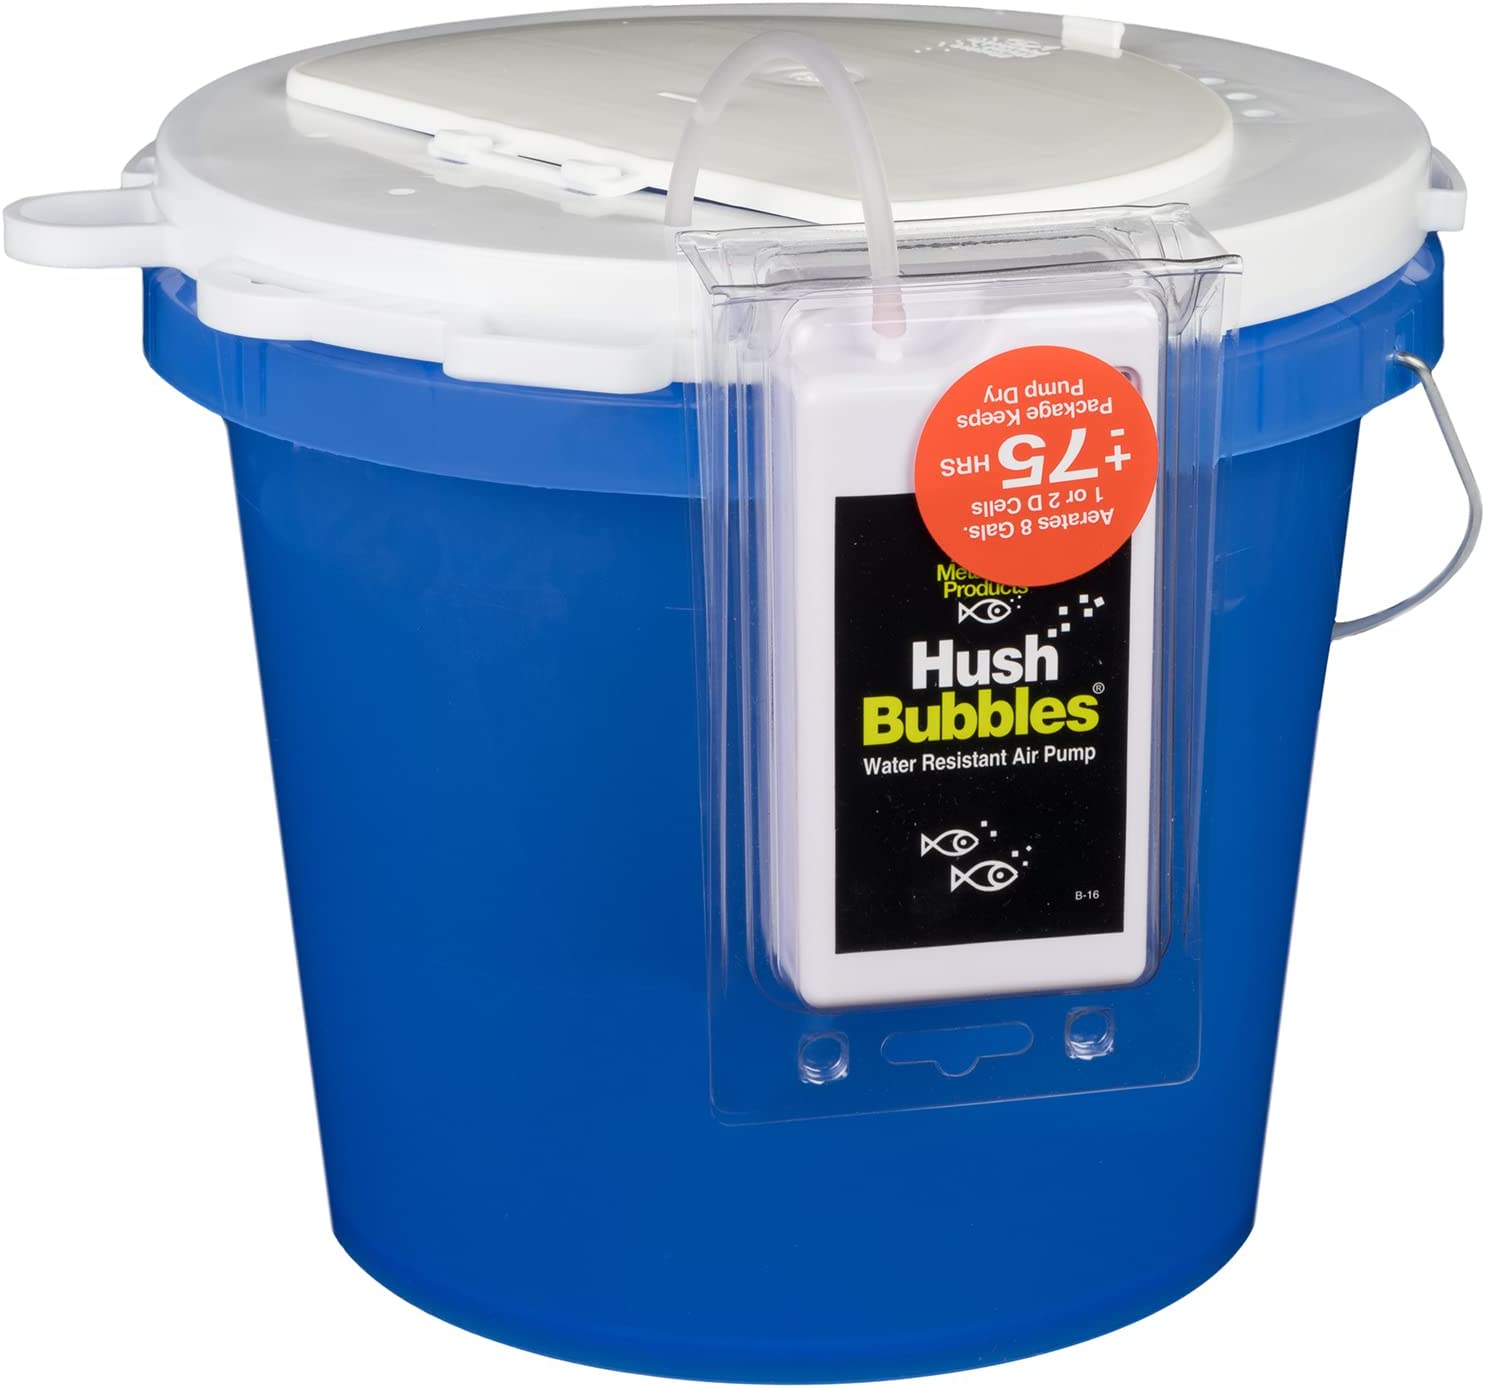 Marine Metal Products Hush Bubbles Aerator - image 5 of 7